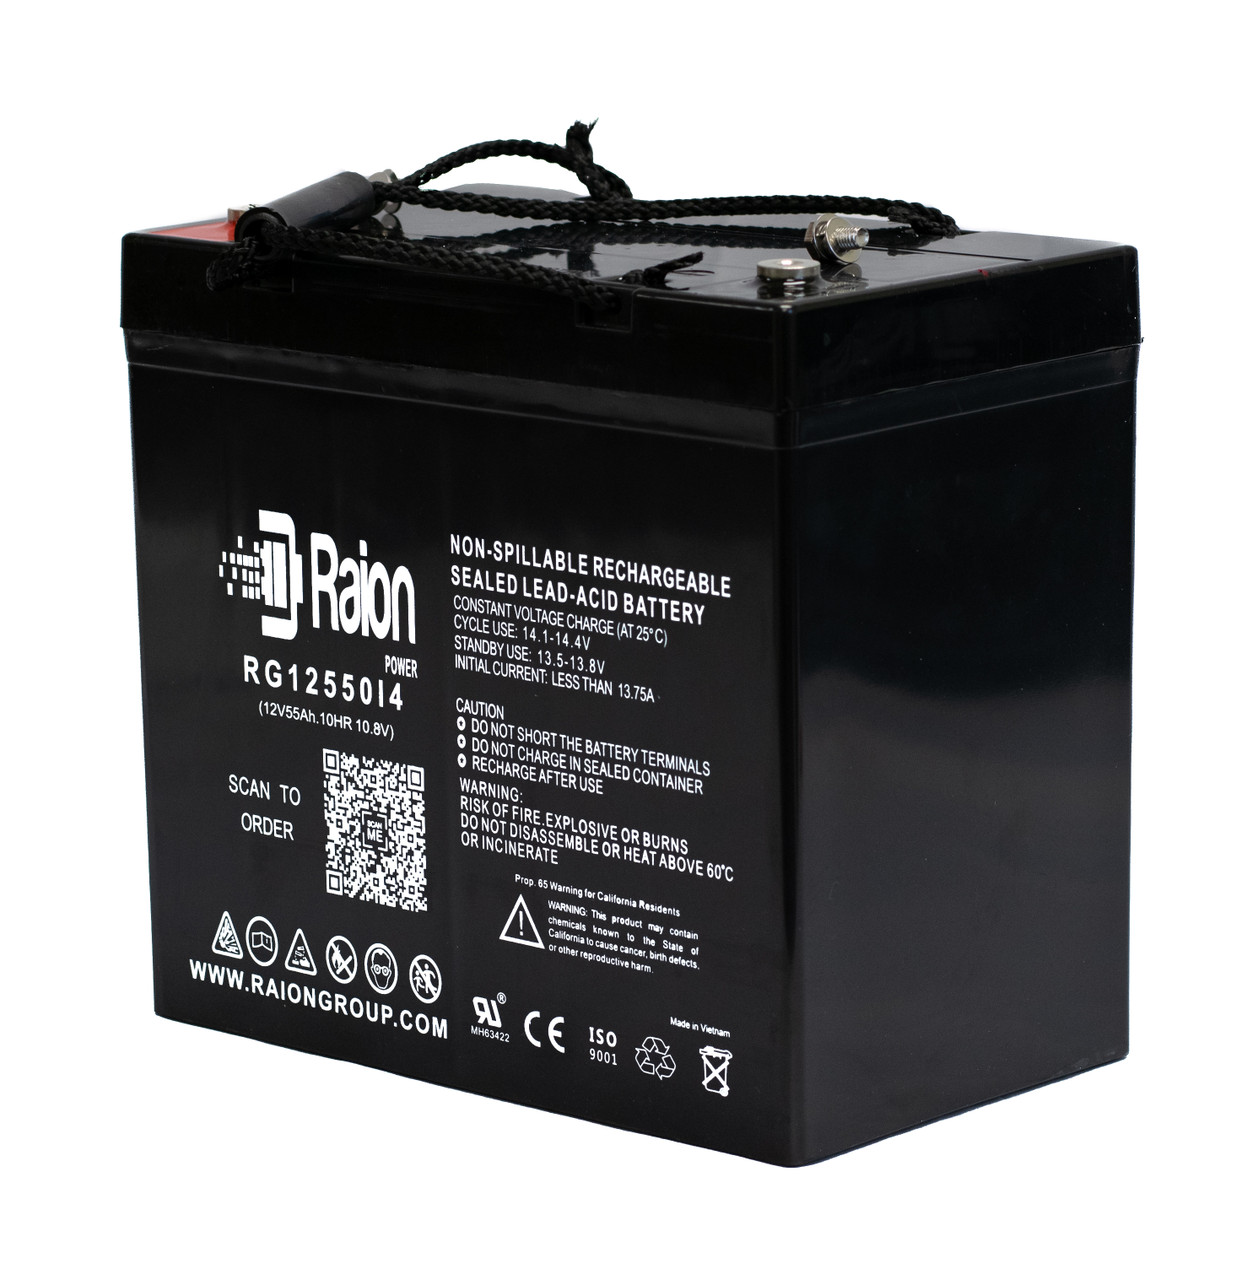 Raion Power 12V 55Ah 22NF Mobility Scooter Battery Replacement for Golden Technologies Compass GP620 CC